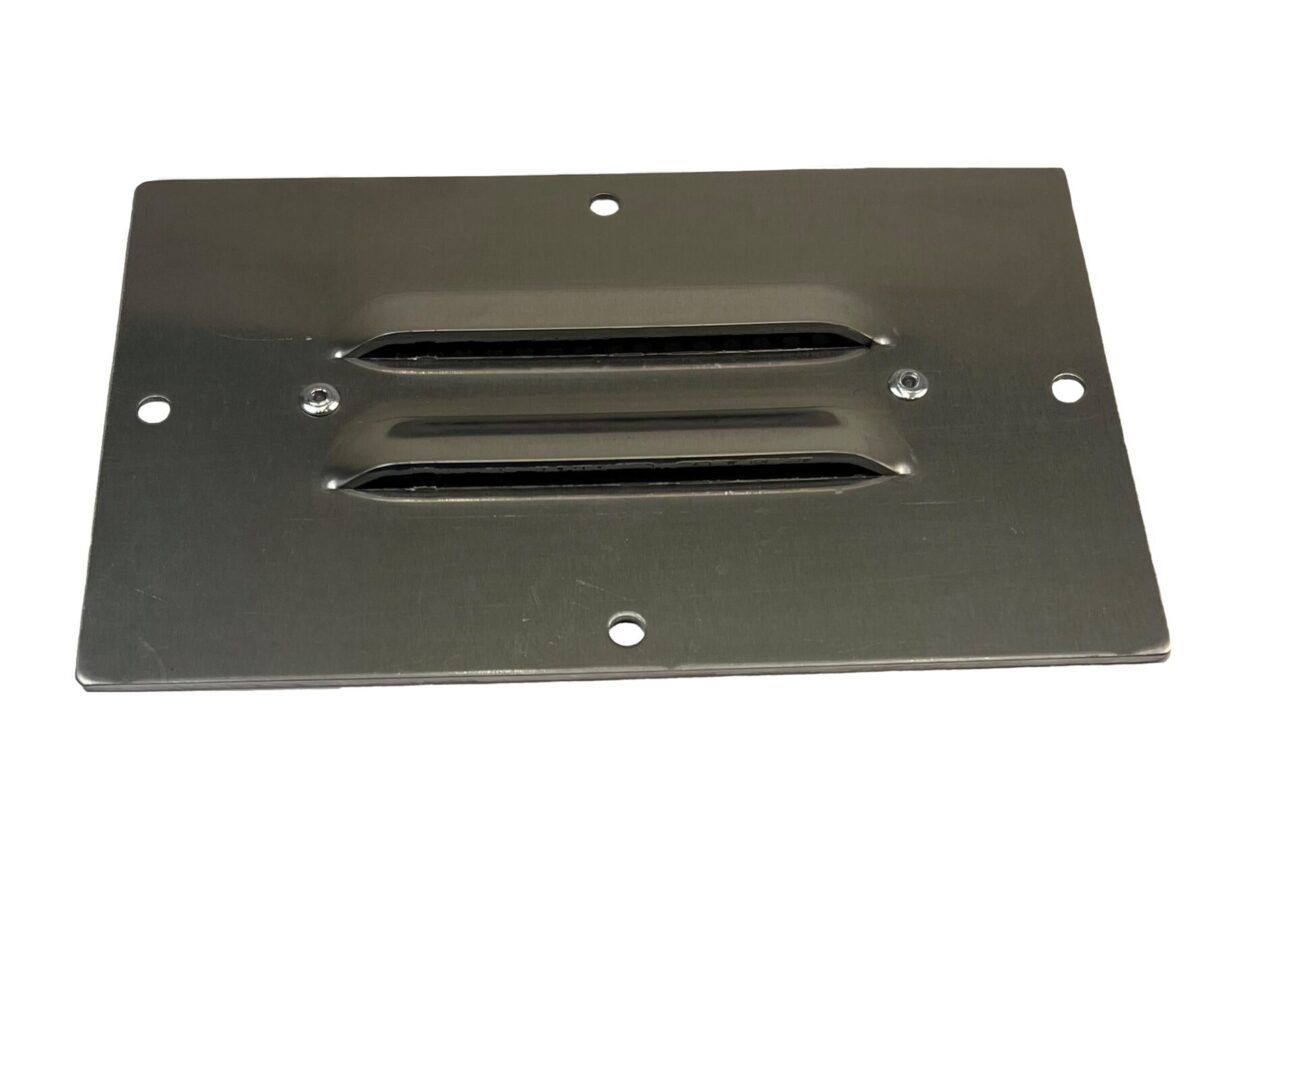 A metal plate with two vents on it.